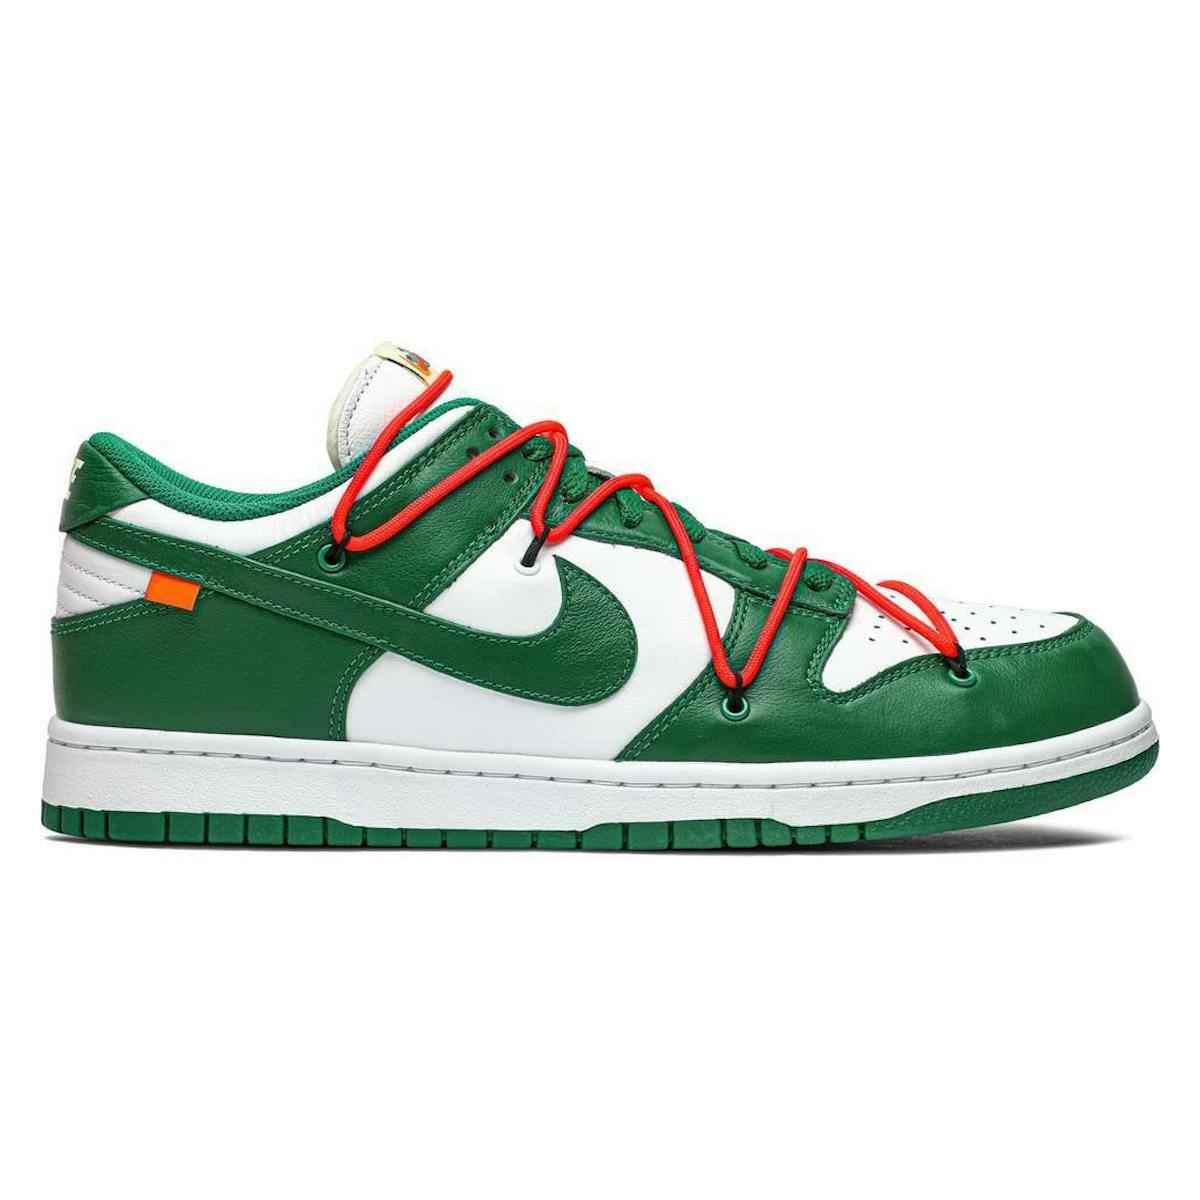 OFF-WHITE x  Nike Dunk Low "Pine Green"